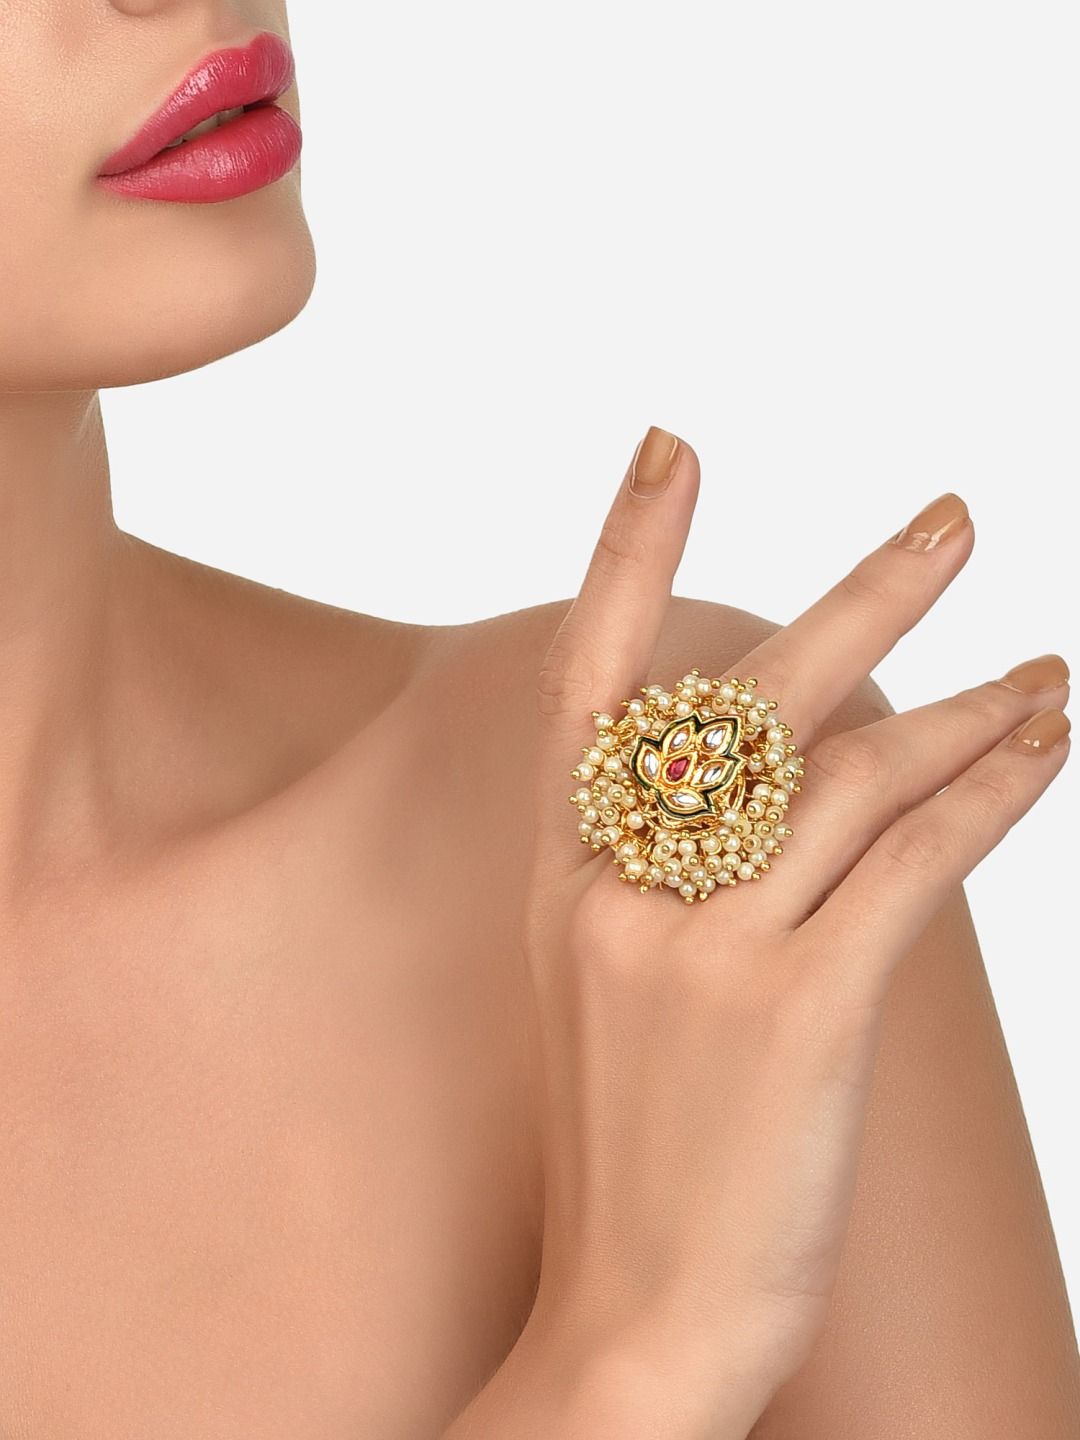 Zaveri Pearls Gold-Plated White & Red Kundan-Studded & Beaded Finger Ring Price in India